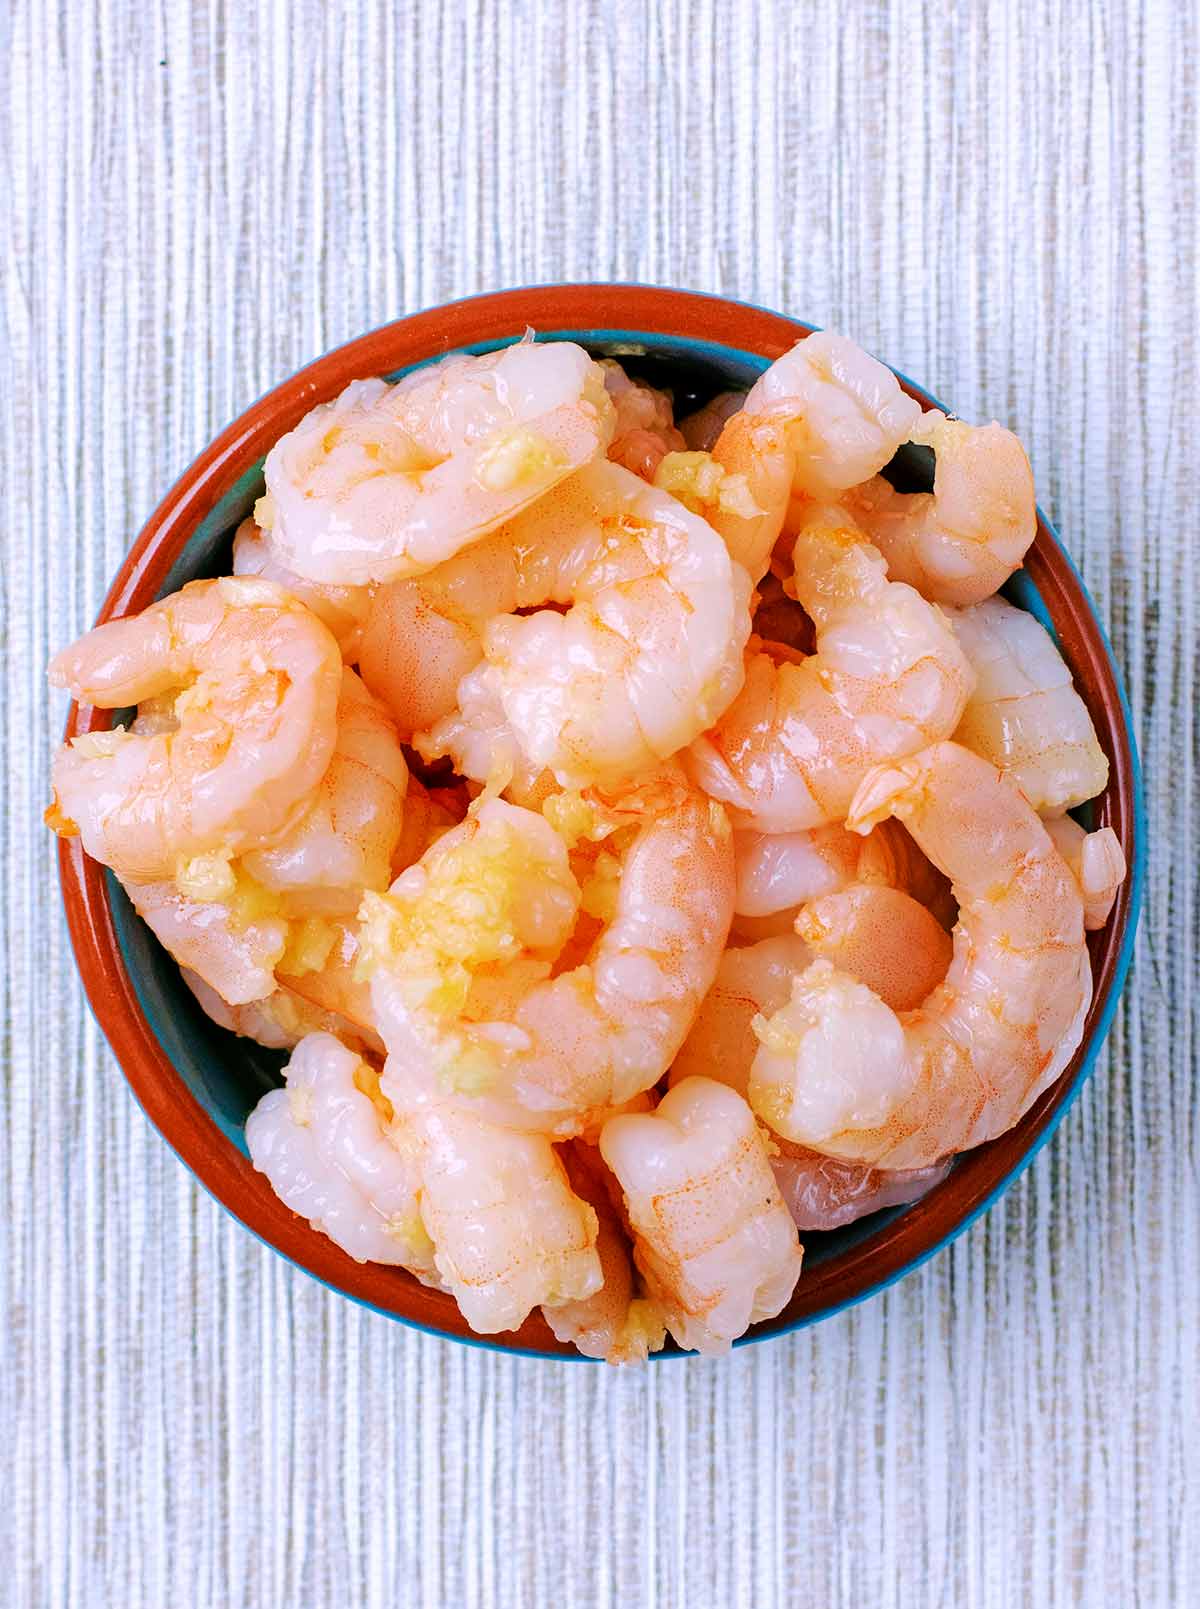 Prawns mixed with oil and garlic in a small bowl.